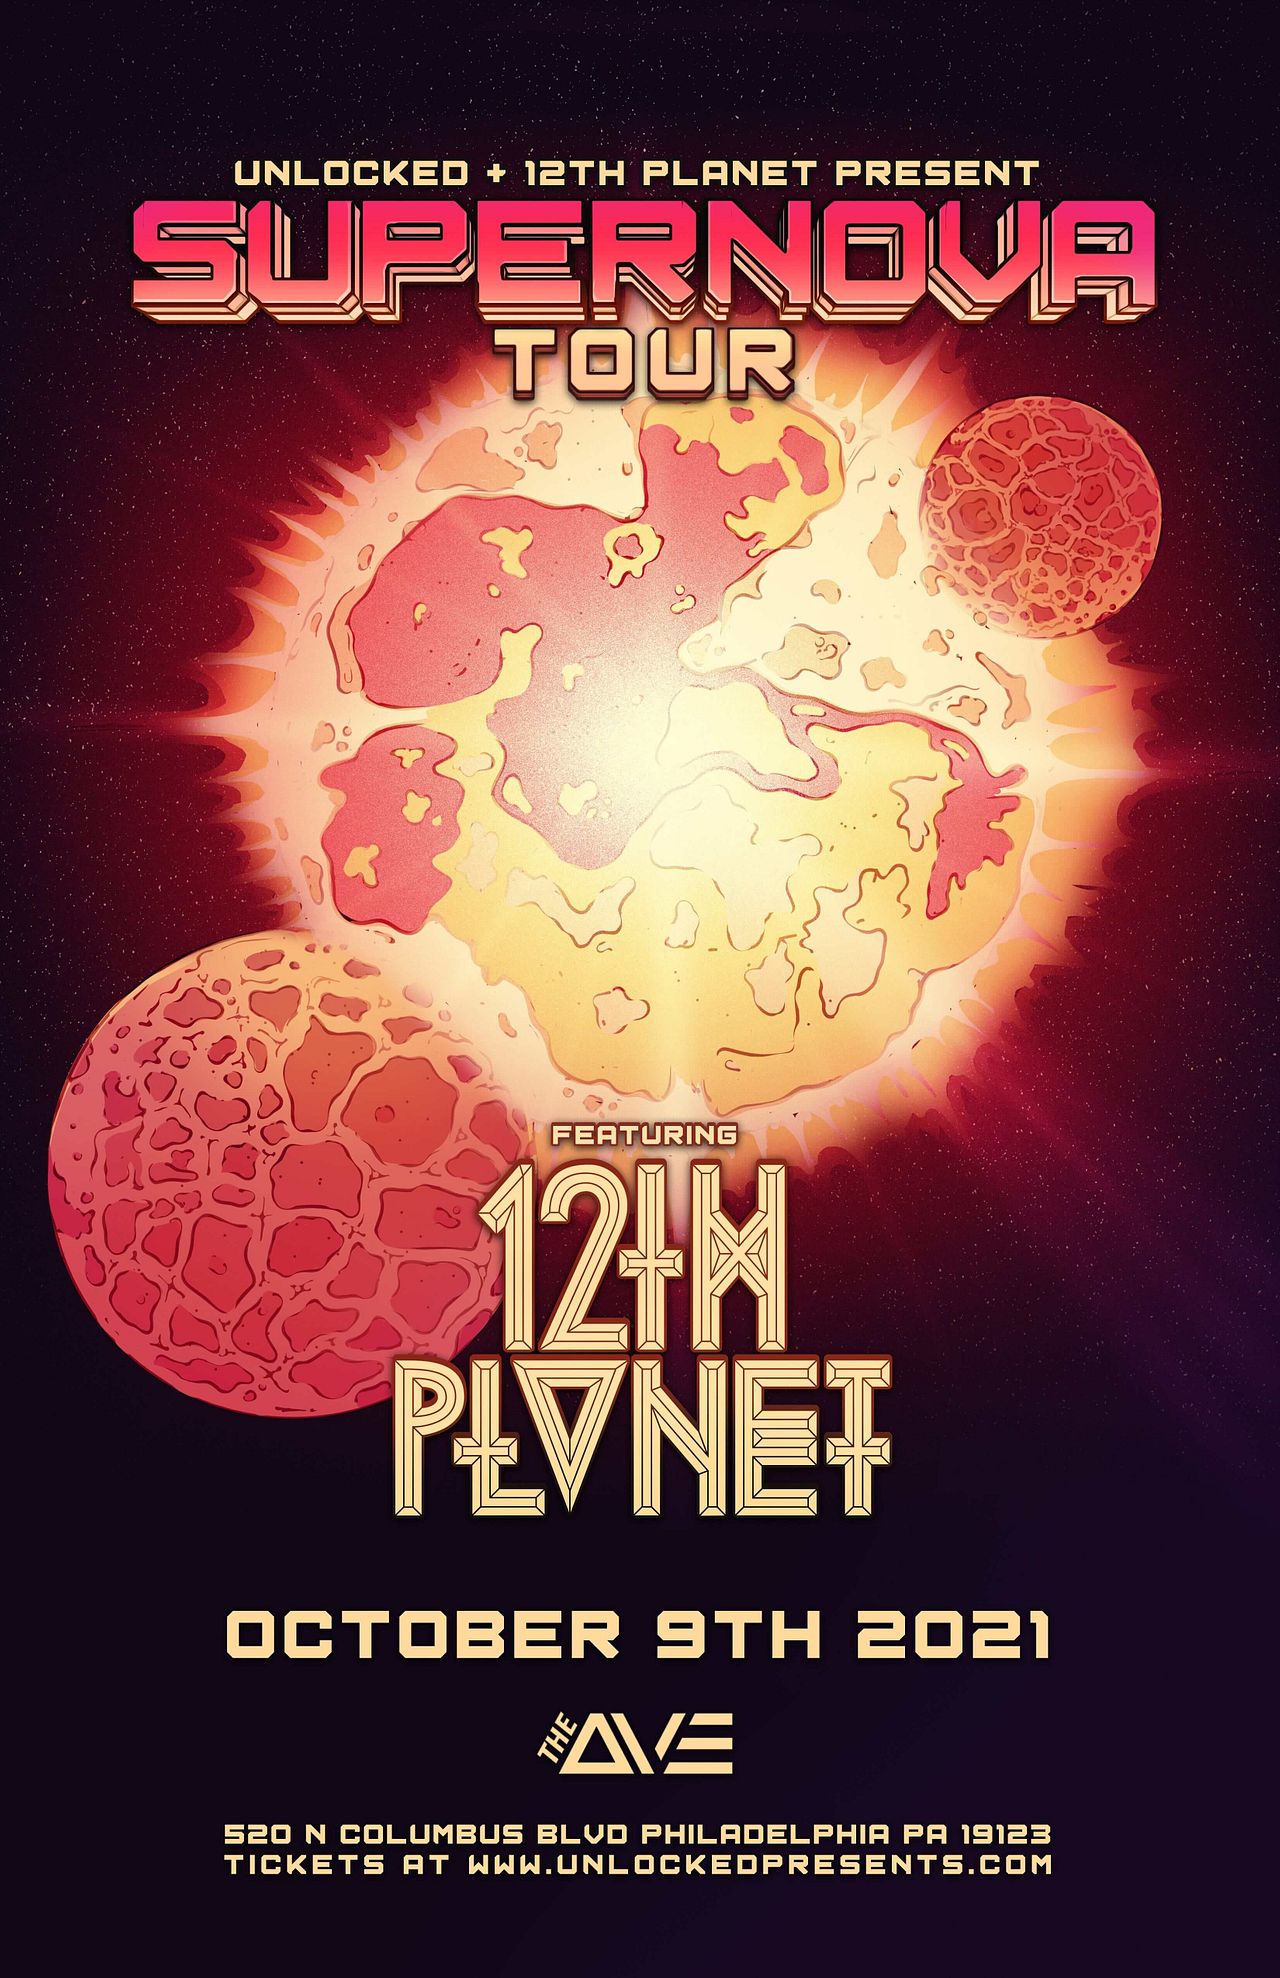 Supernova Tour ft 12th Tickets at The Ave Live in Philadelphia